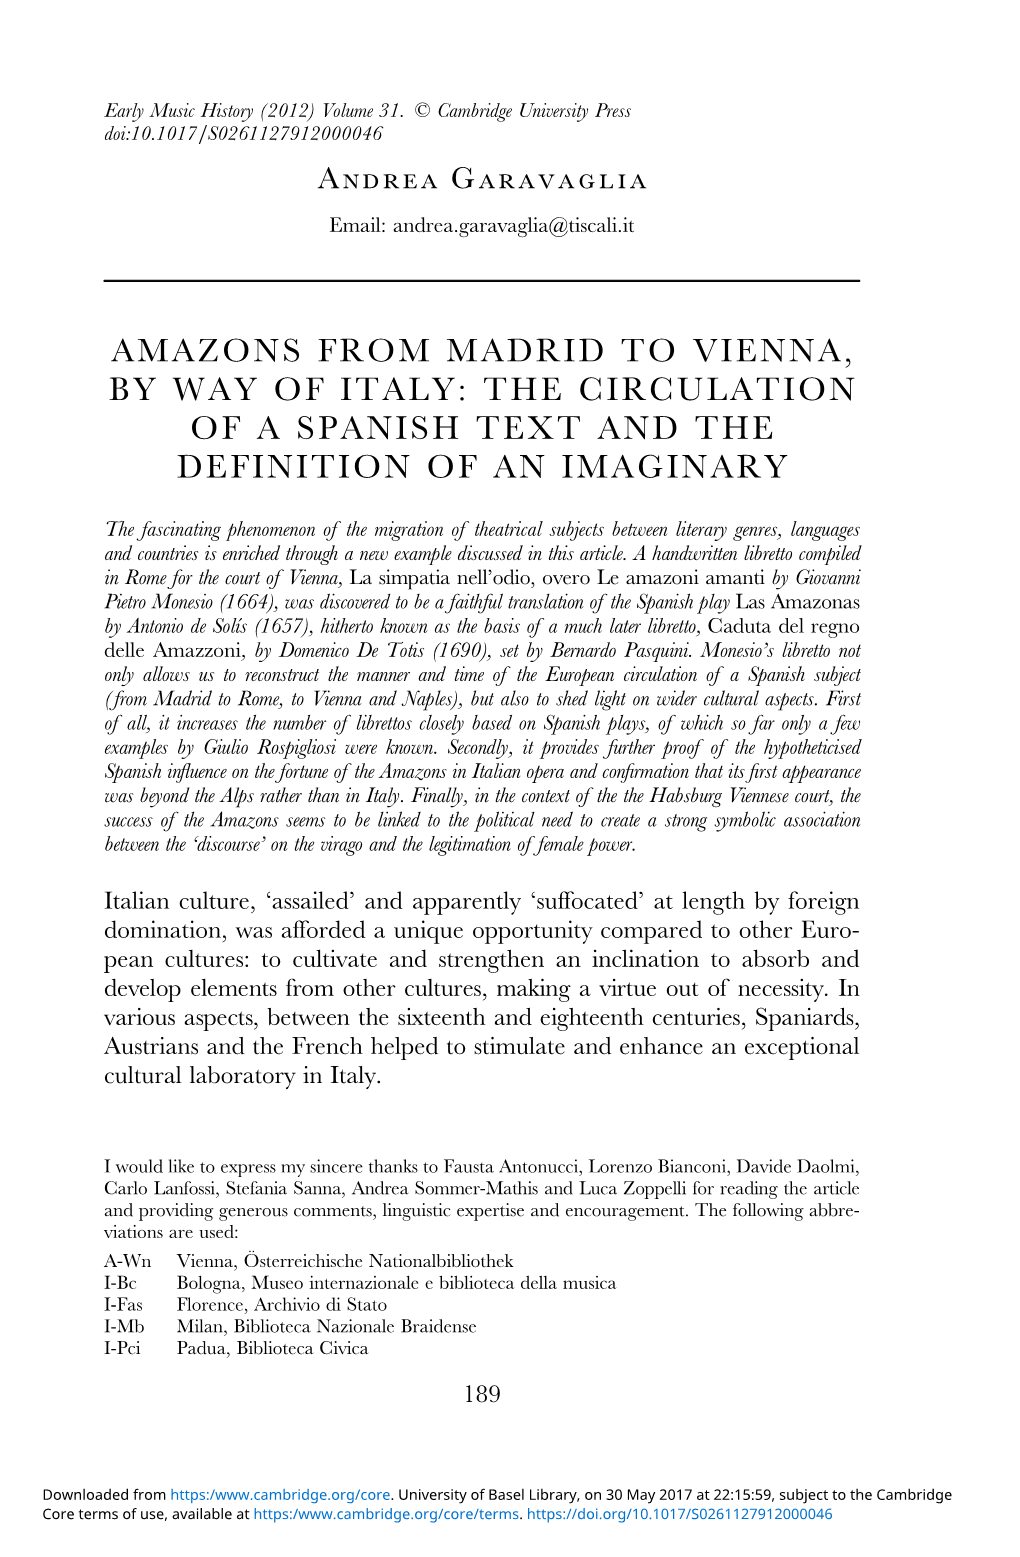 Amazons from Madrid to Vienna, by Way of Italy: the Circulation of a Spanish Text and the Definition of an Imaginary